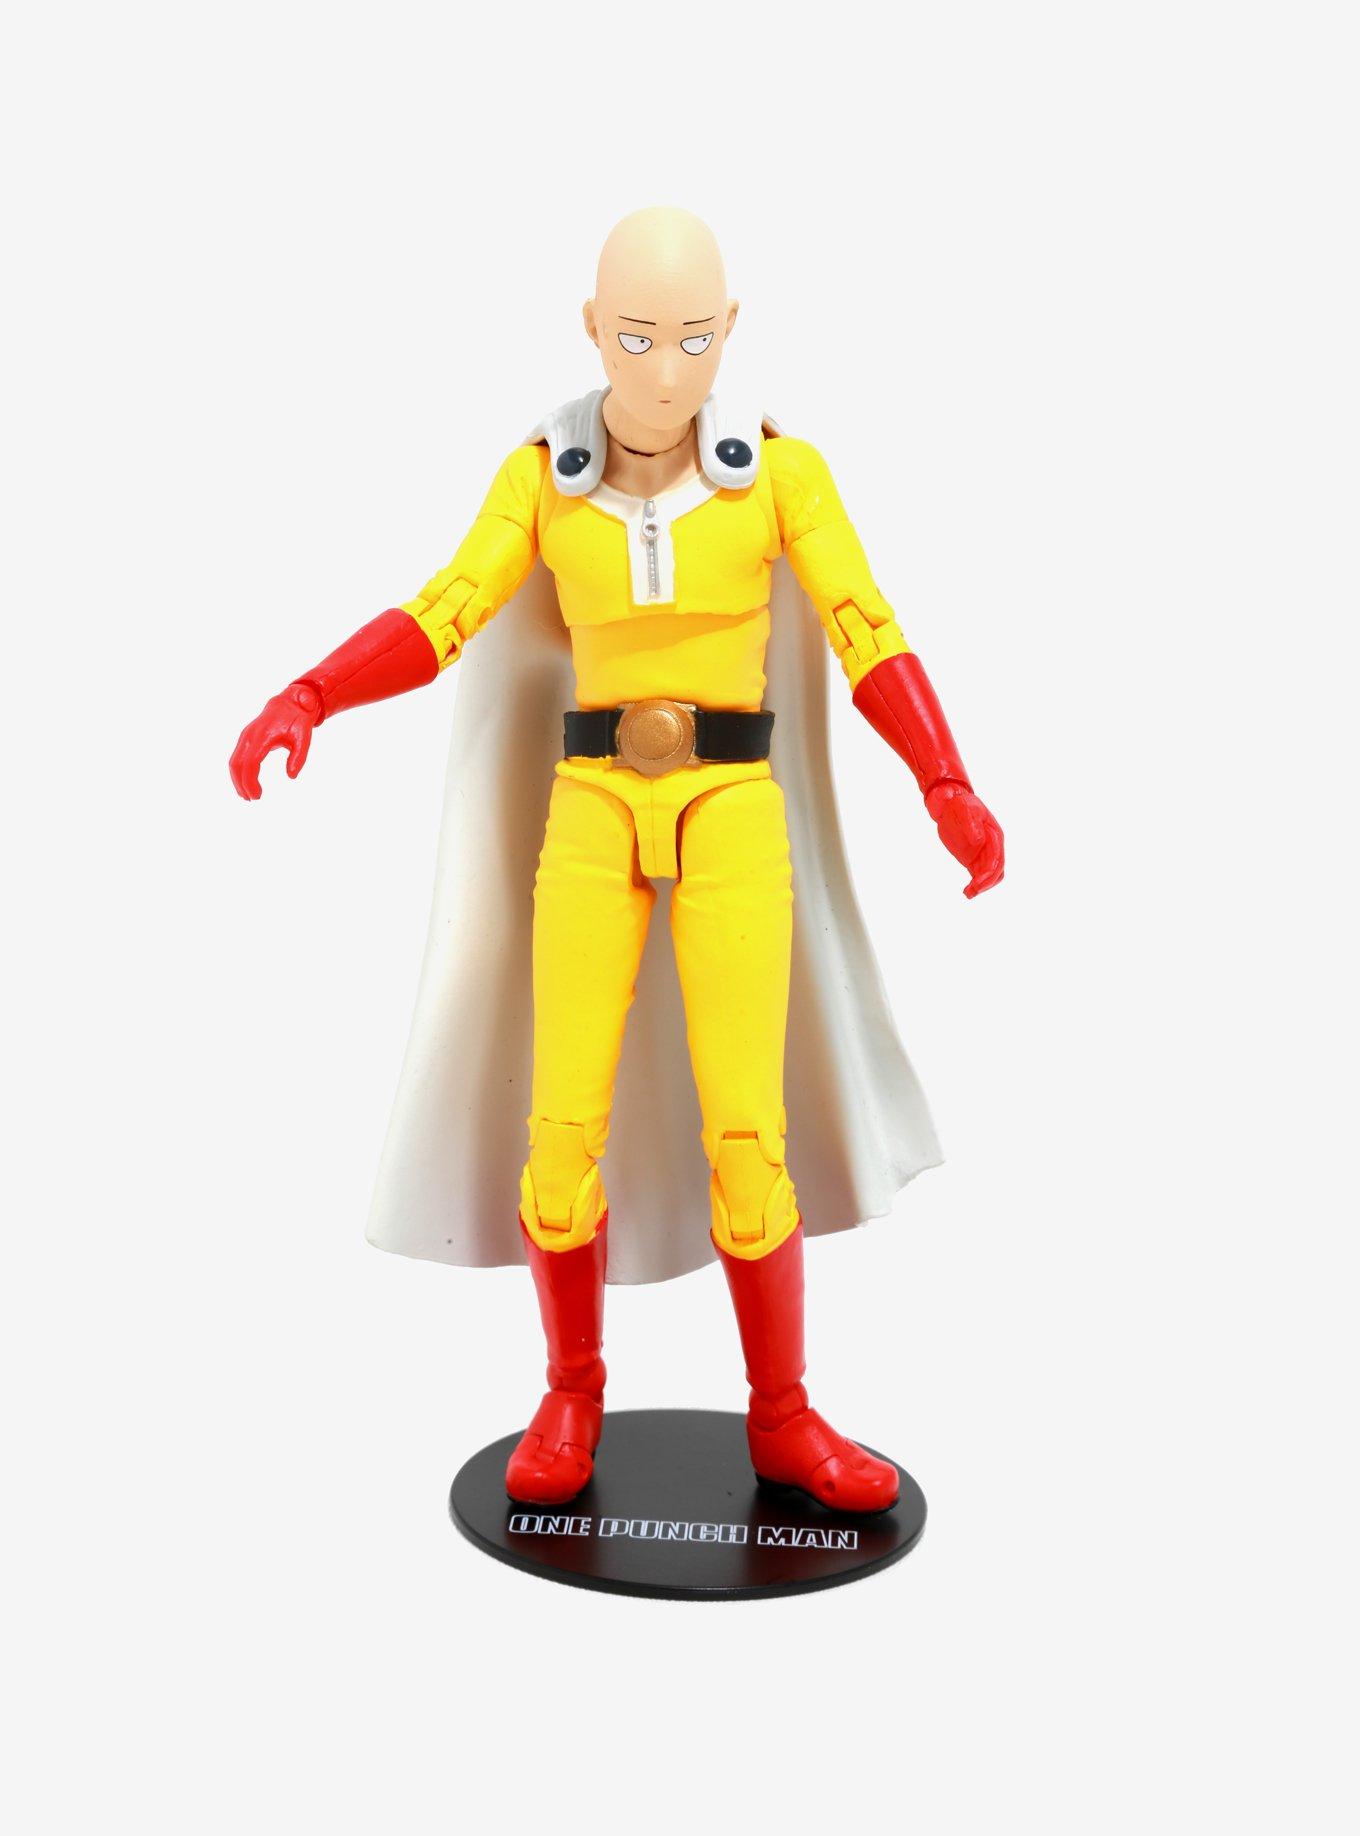 McFarlane Toys - Saitama is in stores! Find him at the